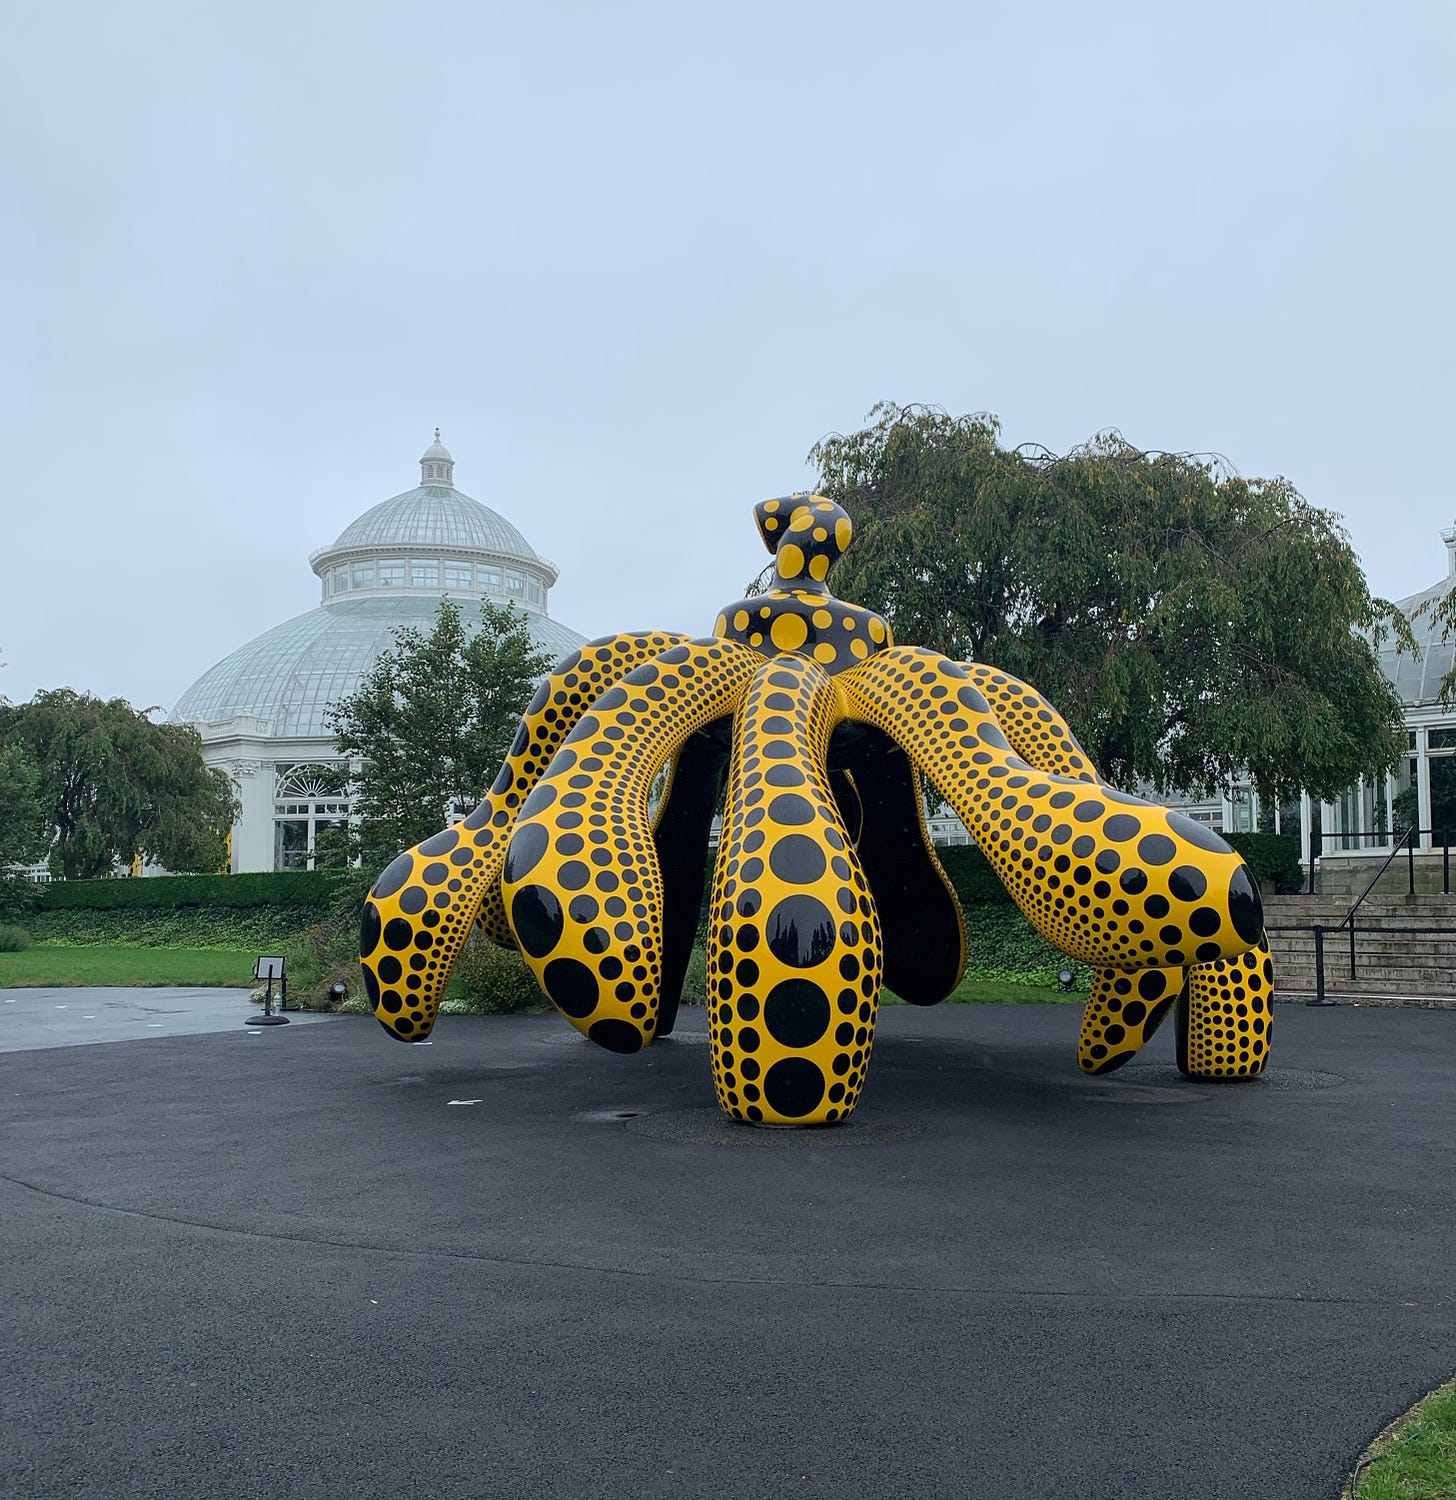 Kusama’s Dancing Pumpkin (2020) photographed by Kait outside the conservatory. The shape of the "pumpkin" mirrors that of the Haupt Conservatory's architecture. Pumpkin is a large sculpture in yellow and black with polka dots. It's as if a pumpkin was unstrung and its sections became legs that were frozen in motion.